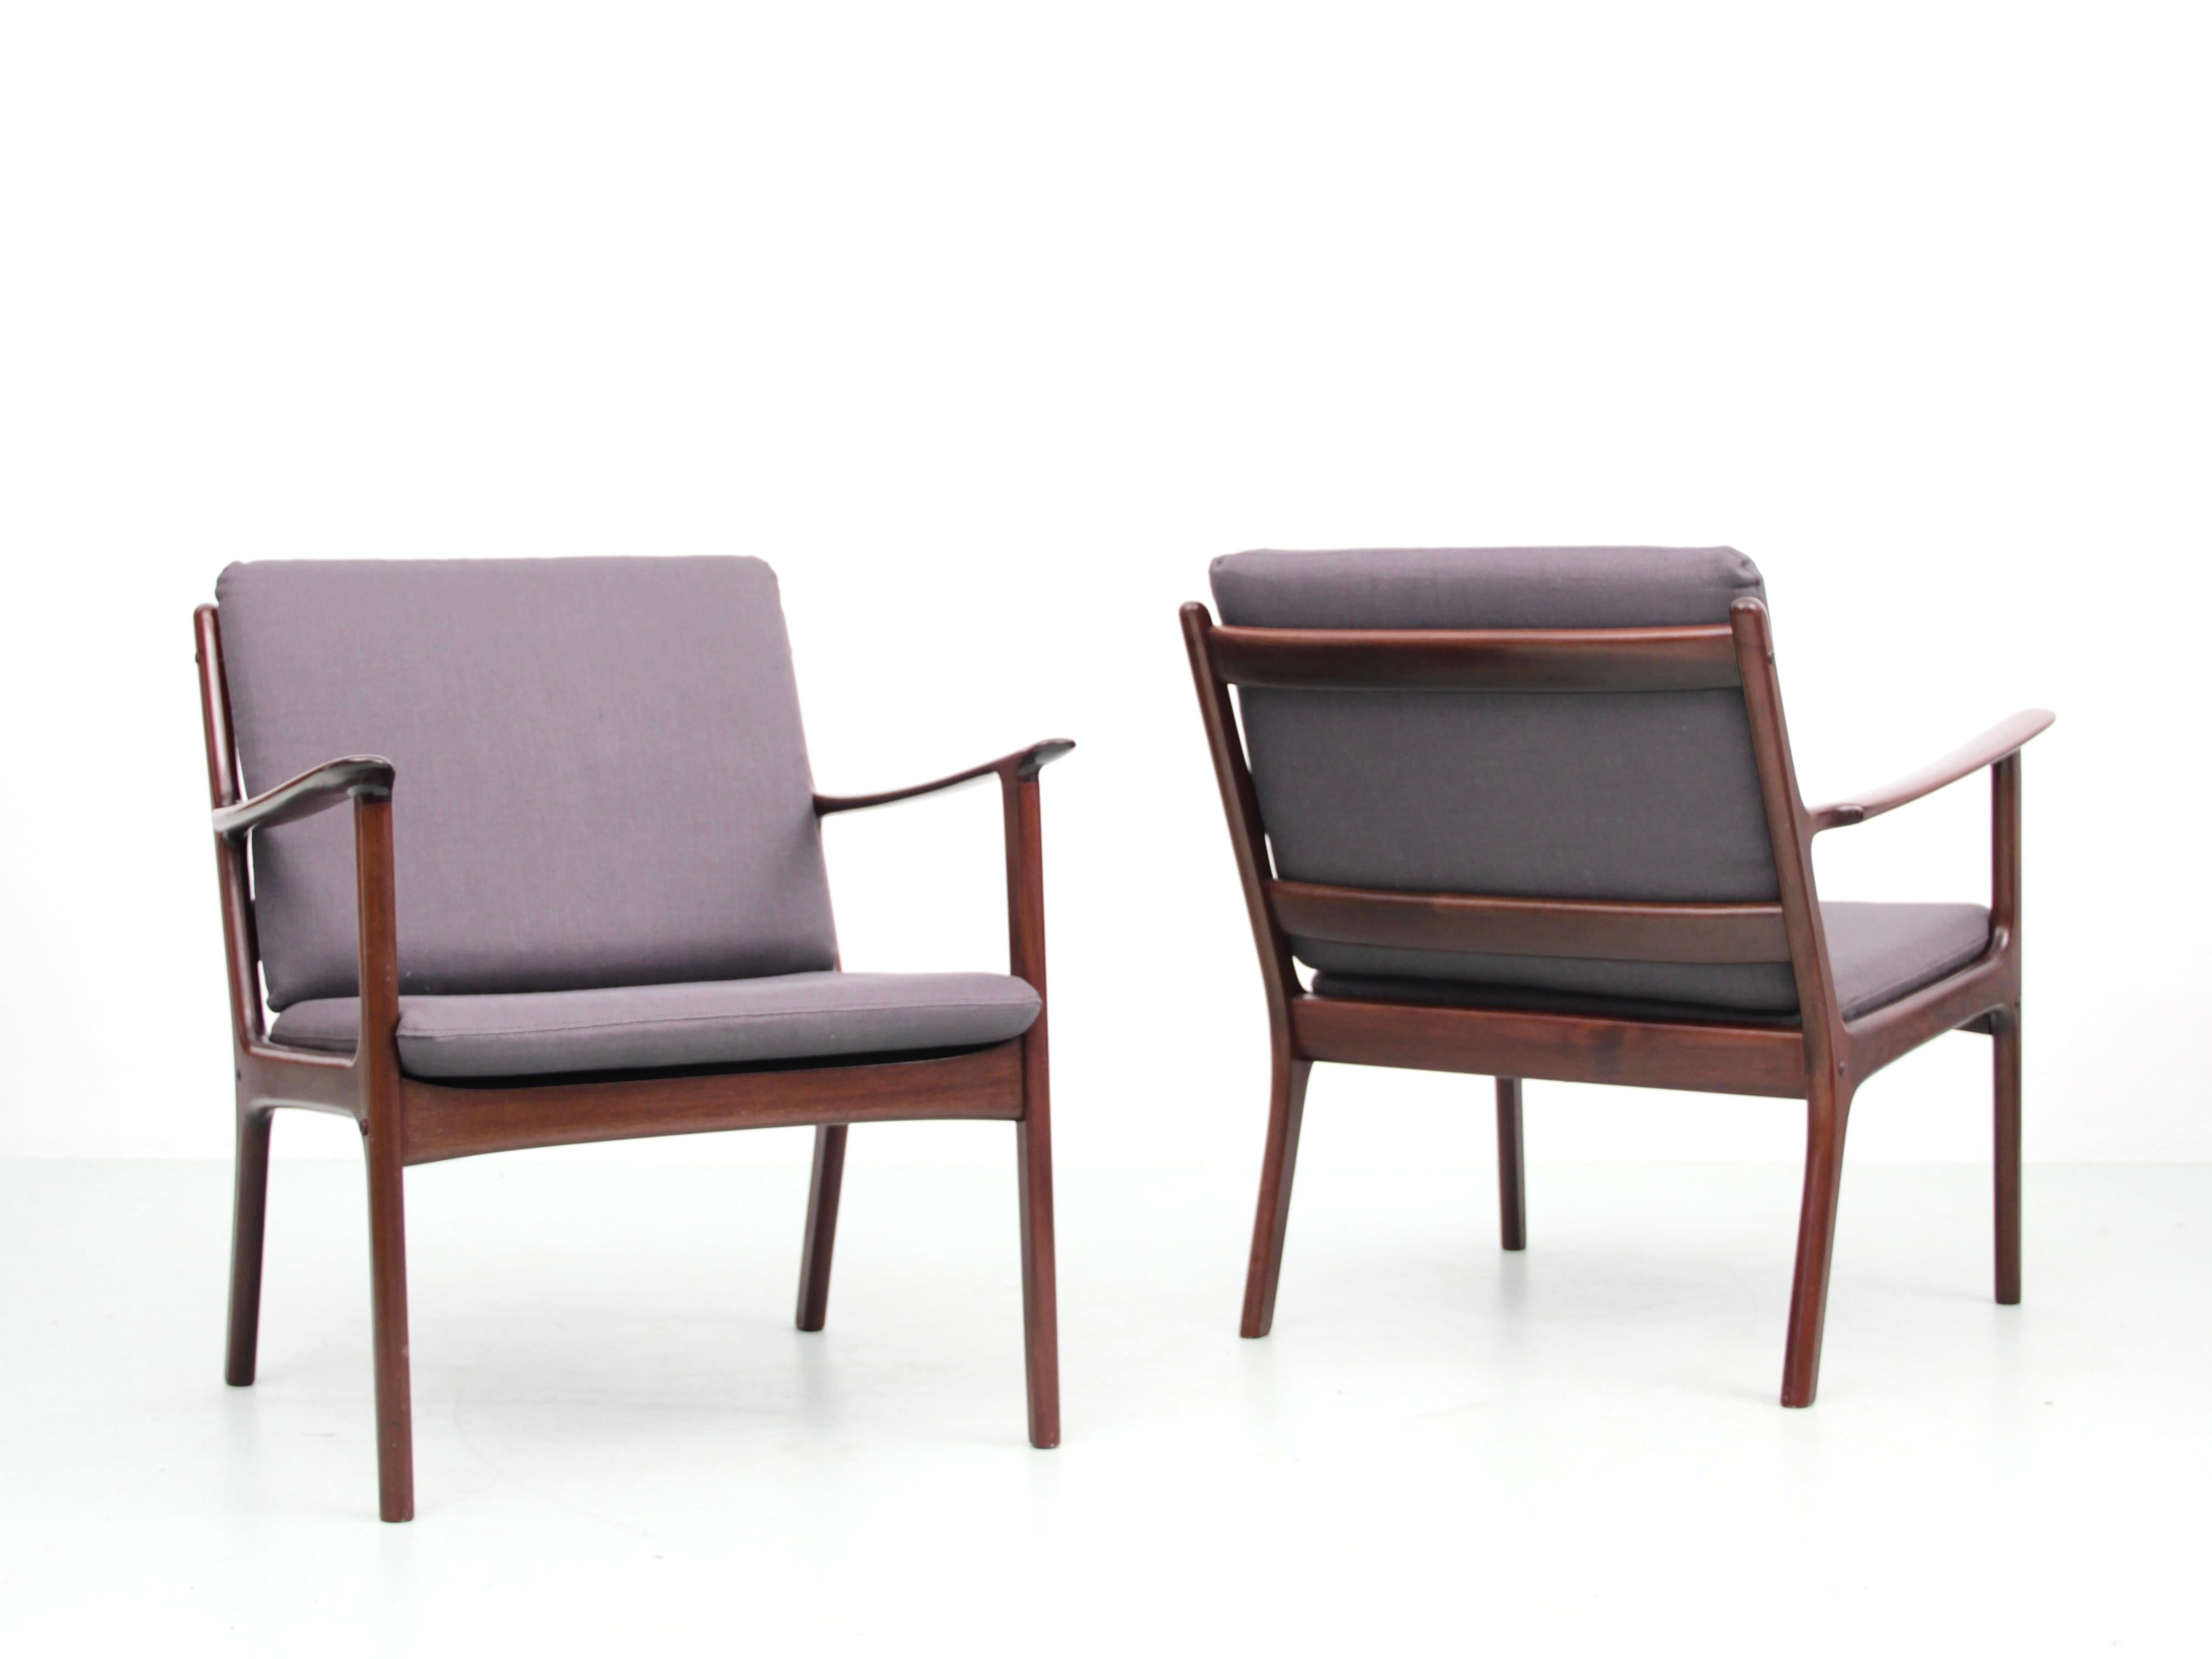 Mid-Century Modern Danish pair of  lounge chairs in mahogany model PJ 112 by Ole Wanscher. Original fabric cushions in medium condition, can be reupholstered on demand. Contact us

